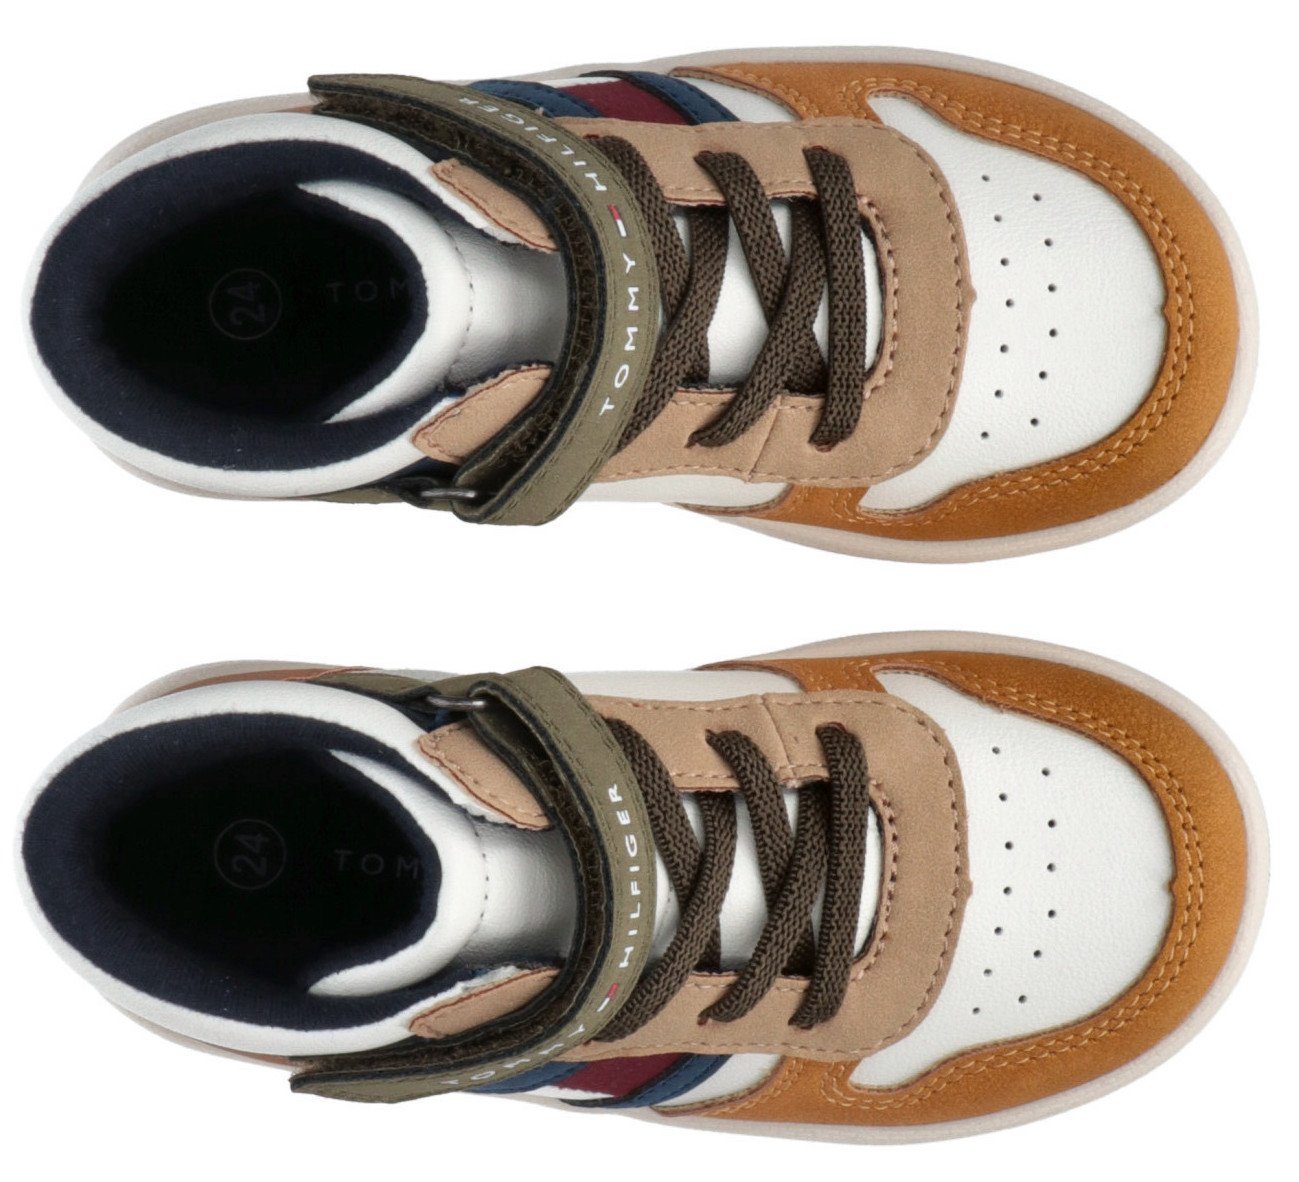 Tommy Hilfiger FLAG Look modischen HIGH LACE-UP/VELCRO im SNEAKER colorblocking Sneaker TOP